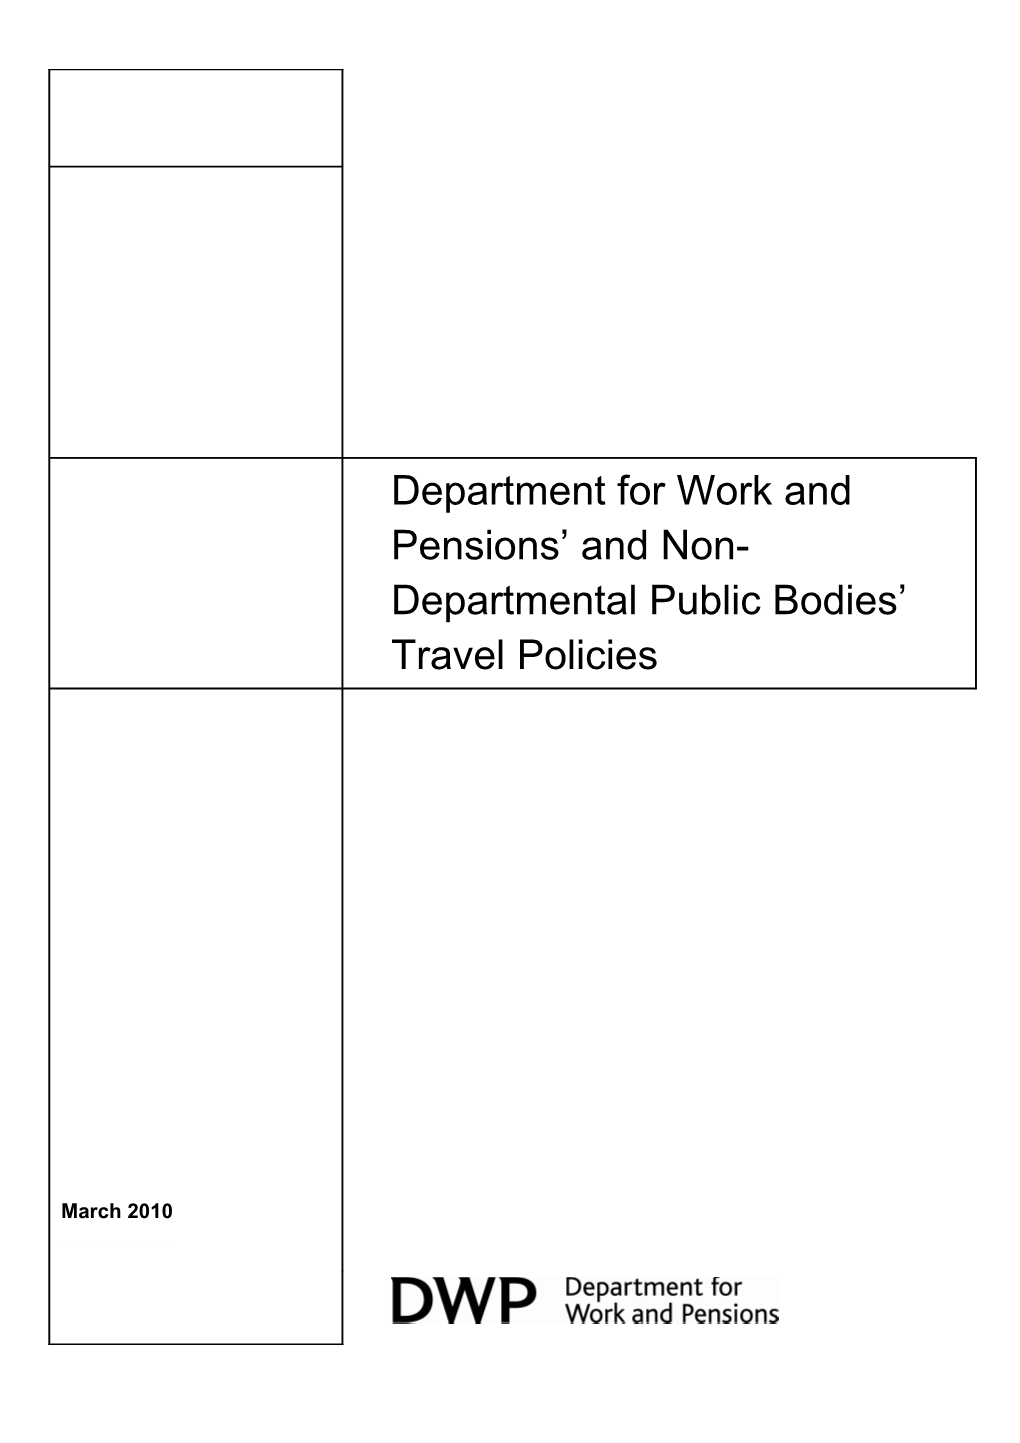 Department for Work and Pensions Report